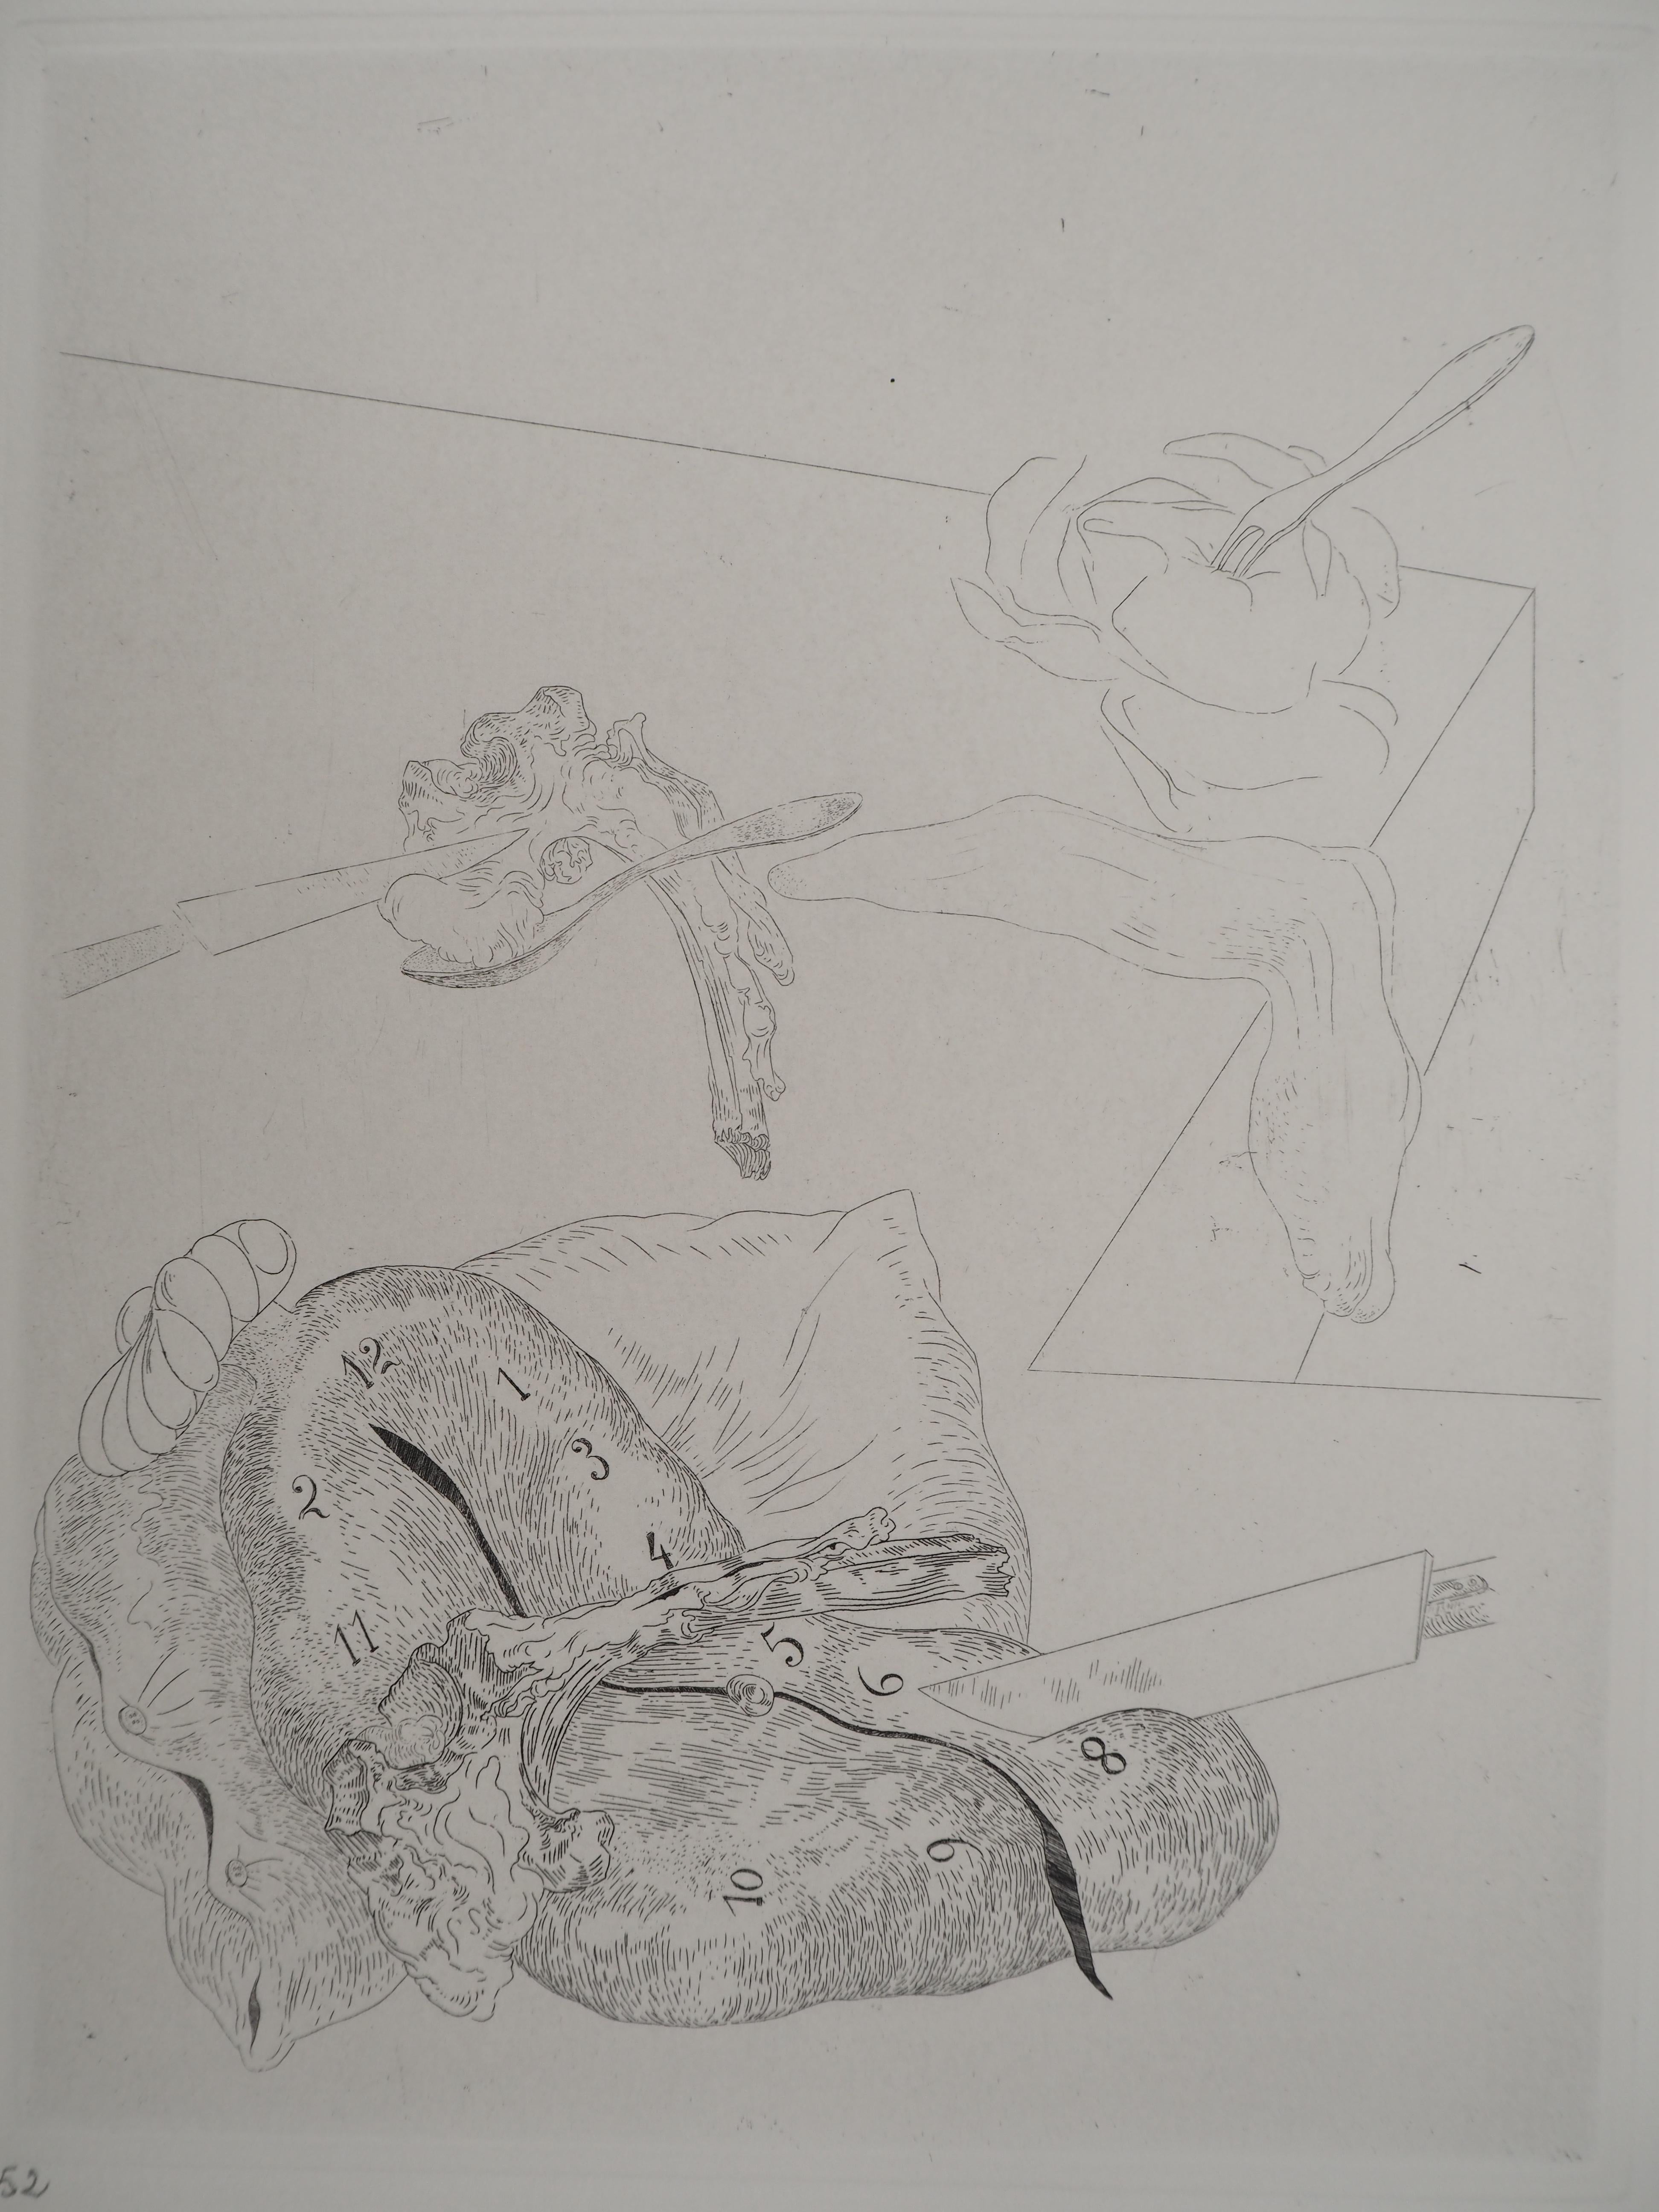 Salvador Dali
Time Sleeping, 1975

Original etching 
Signed in pencil 
Limited to 100 copies (Here numbered 52)
On Arches vellum  32.5 x 25 cm (c. 12.7 x 9.8 in)

REFERENCES :
- Catalog raisonne Field #34-2
- Catalog raisonne Michler & Lopsinger